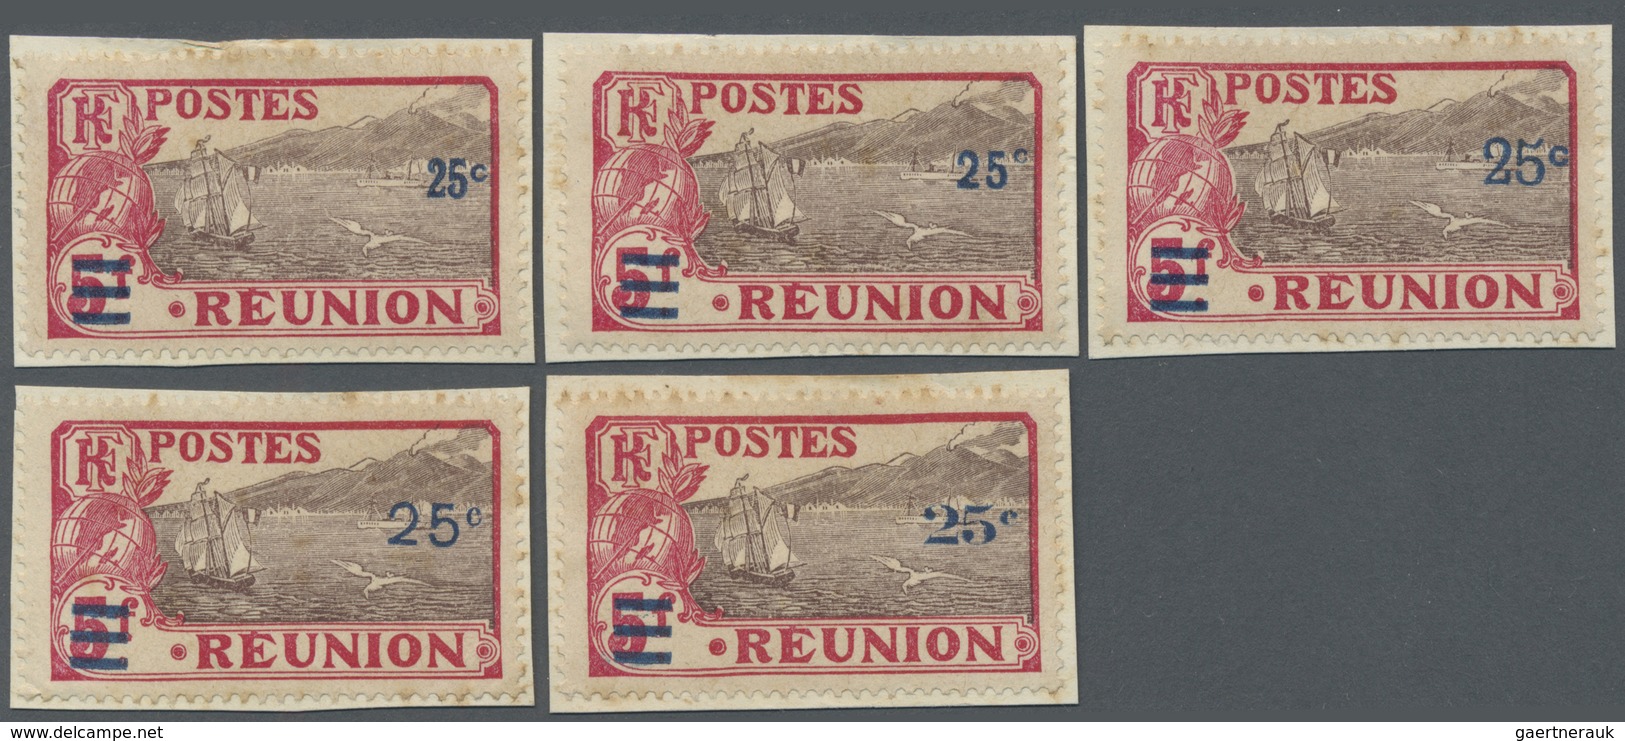 Brfst Reunion: 1926, 25 C. On 2 Fr. Carmine/brown-lilarc With Overprint, Five Different Overprint Types In - Covers & Documents